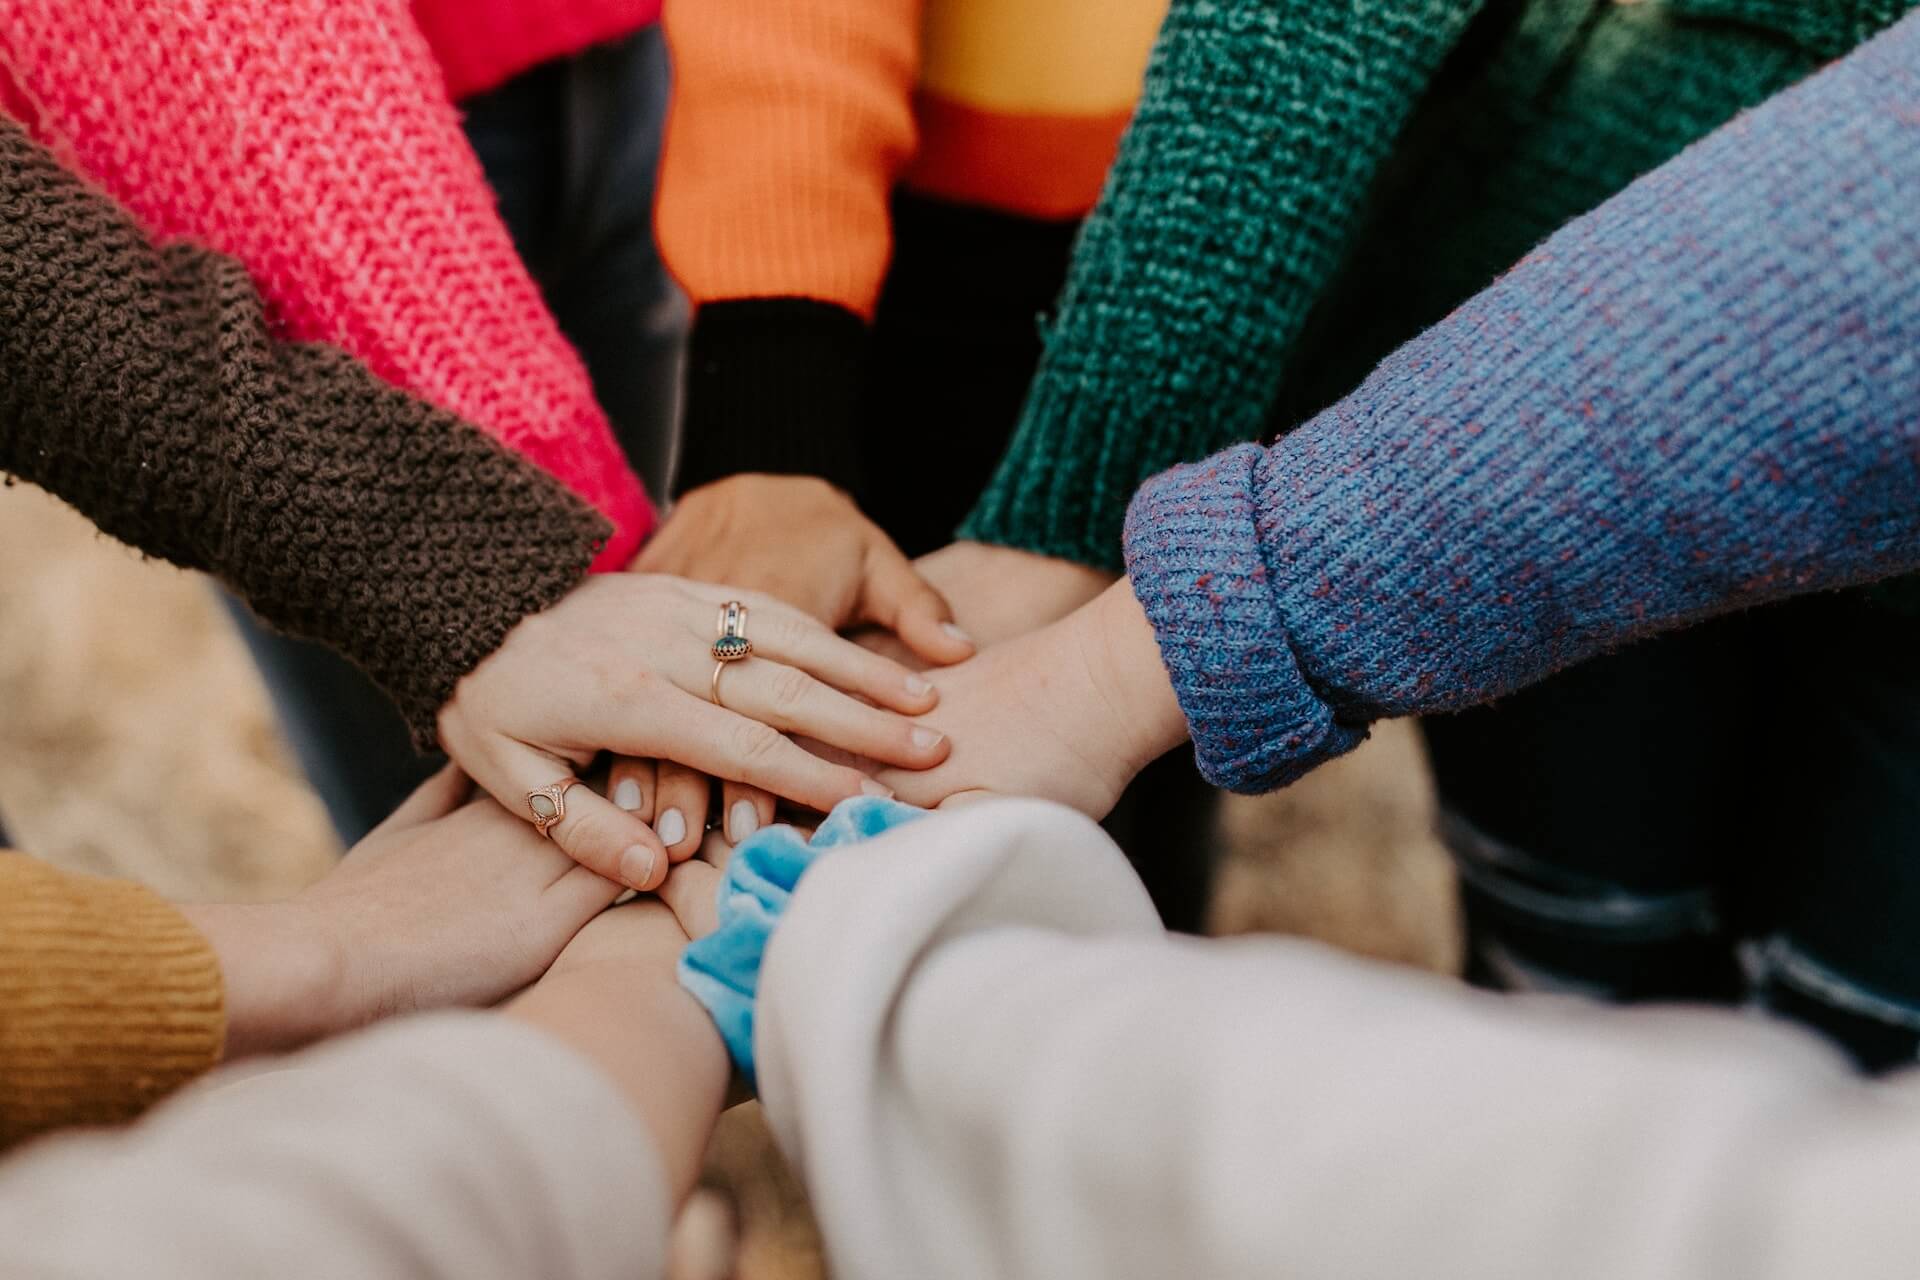 Group of people holding hands in the middle of a circle